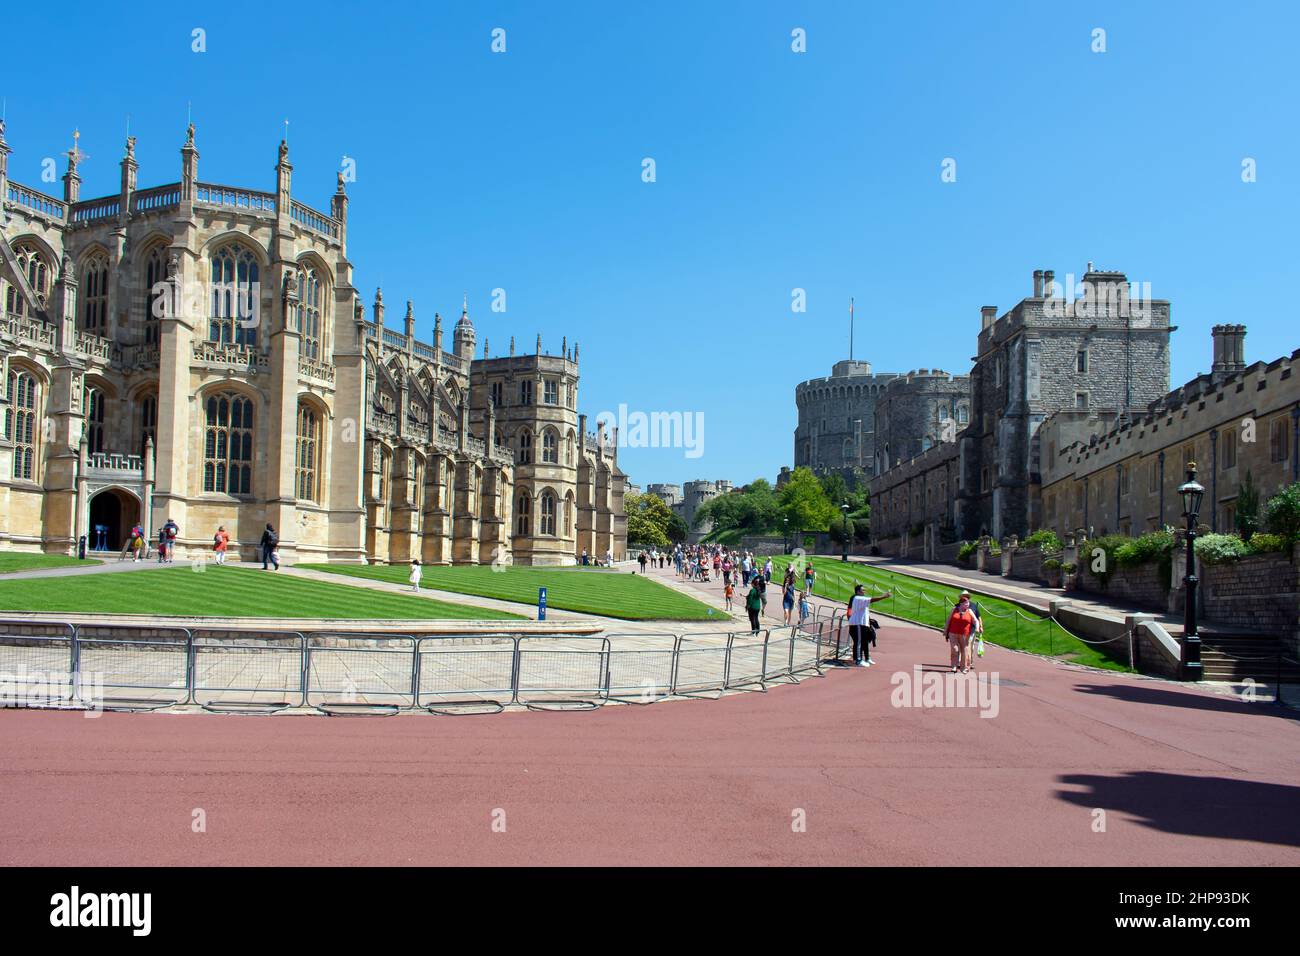 St Georges Chapel and the Round Tower seen from the Lower Ward in Windsor Castle, UK. Metal Barriers line the edge of the pathway as visitors tour. Stock Photo